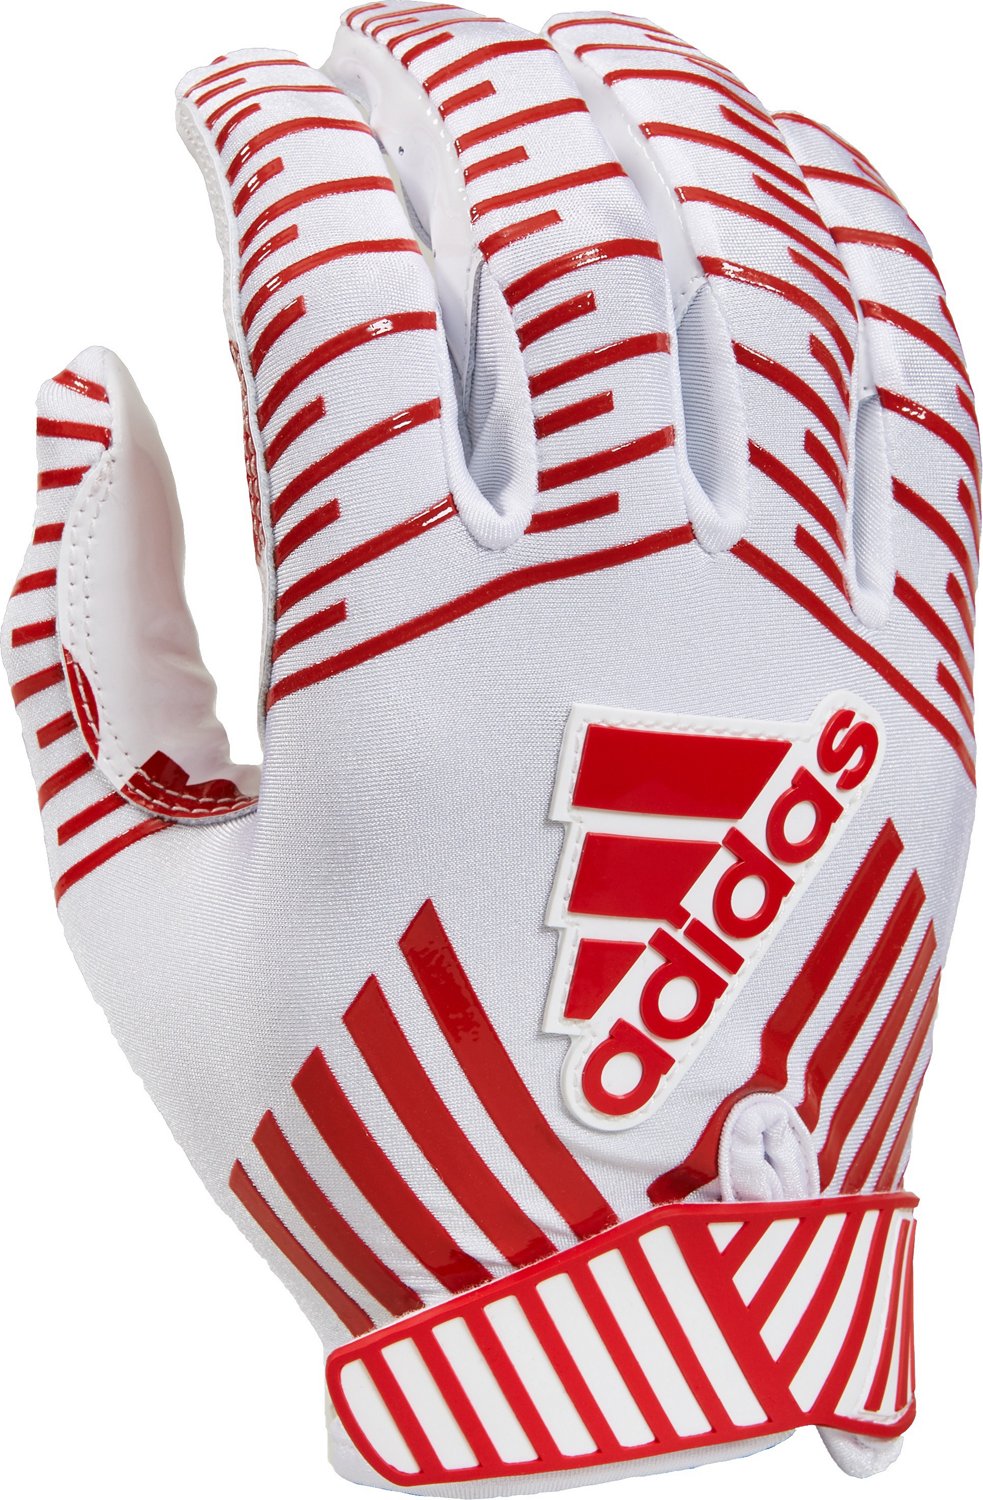 adidas filthy quick gloves